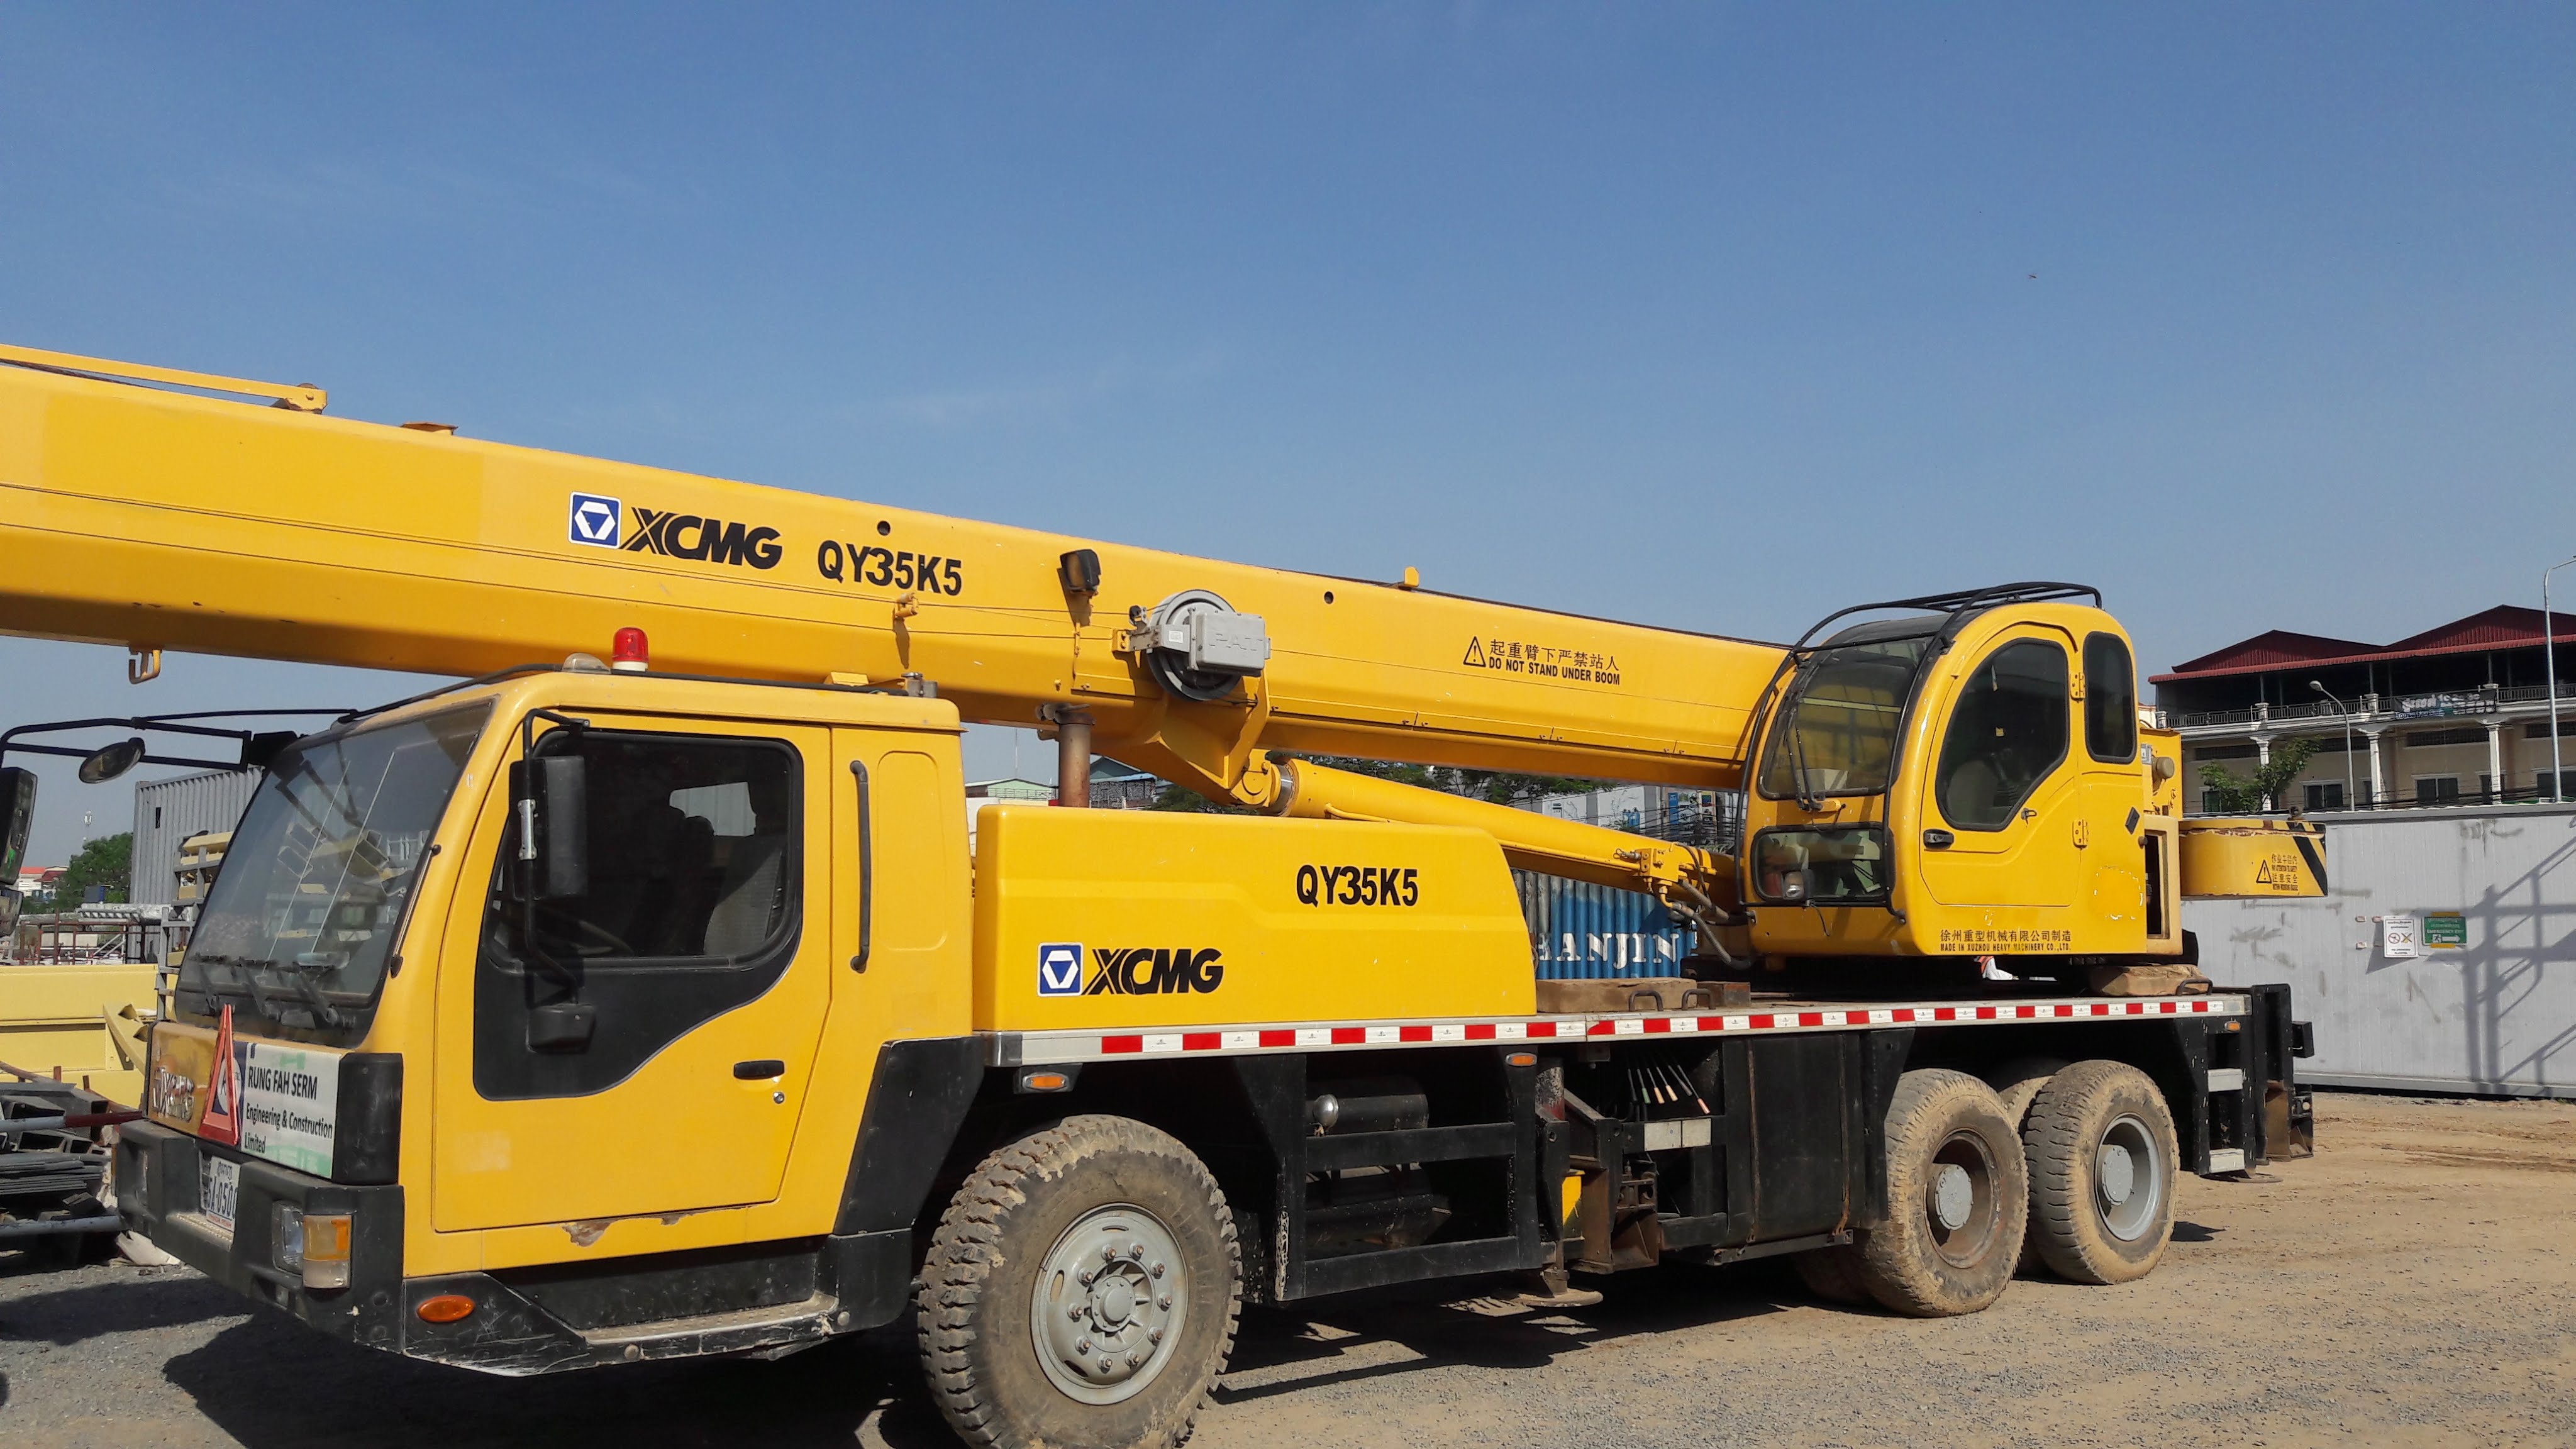 40 feet container to be lift by mobile crane 35t | Mobile crane ...